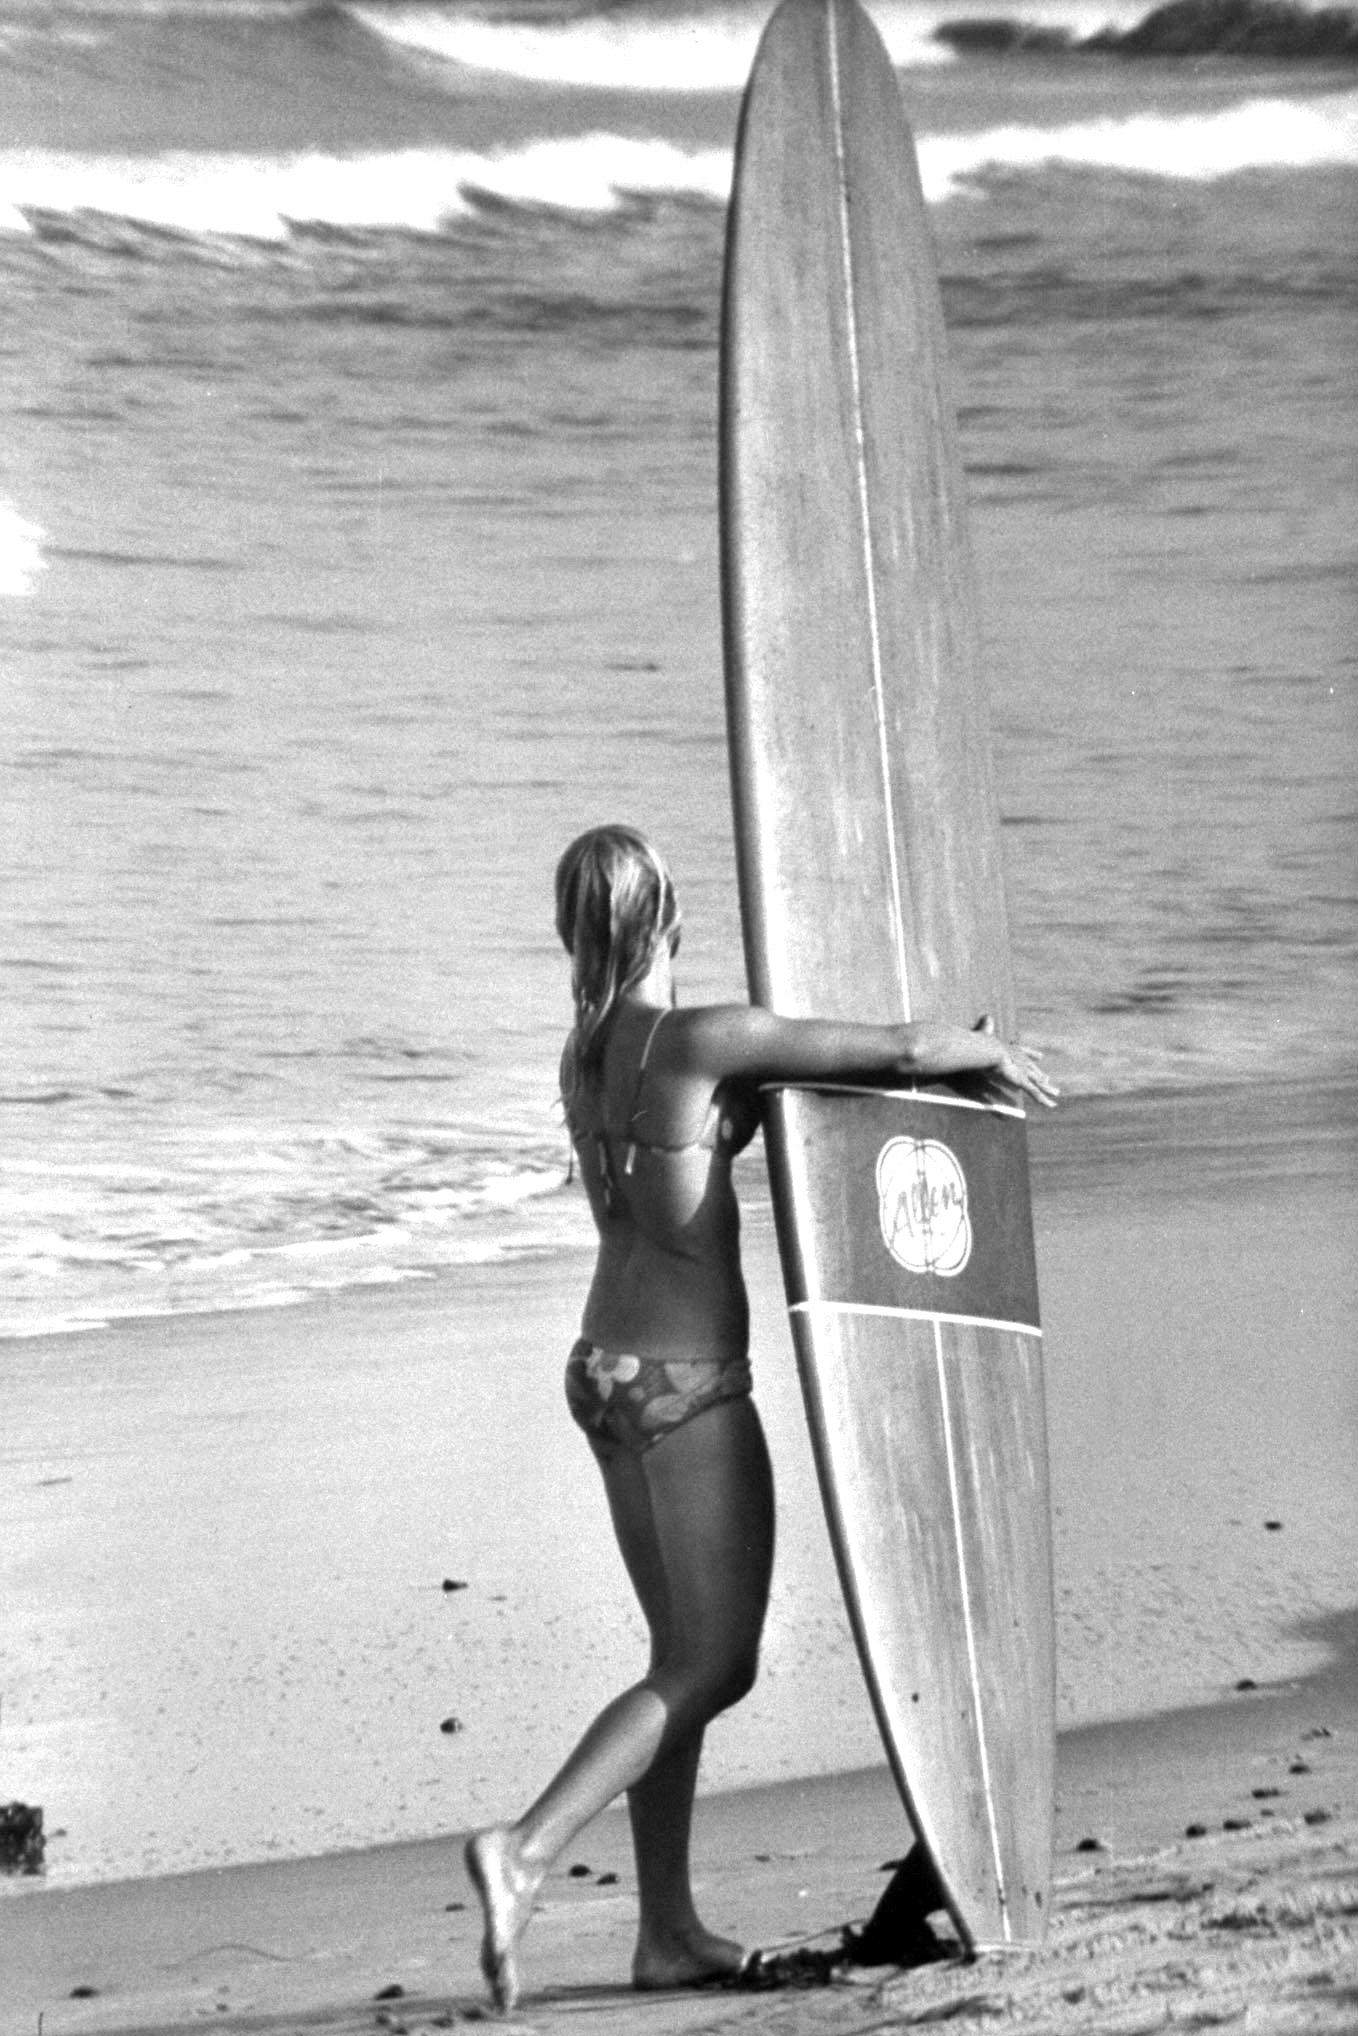 US surfer, Kathie Lacroix, during the Woman's World Surfing Championships, 1966.